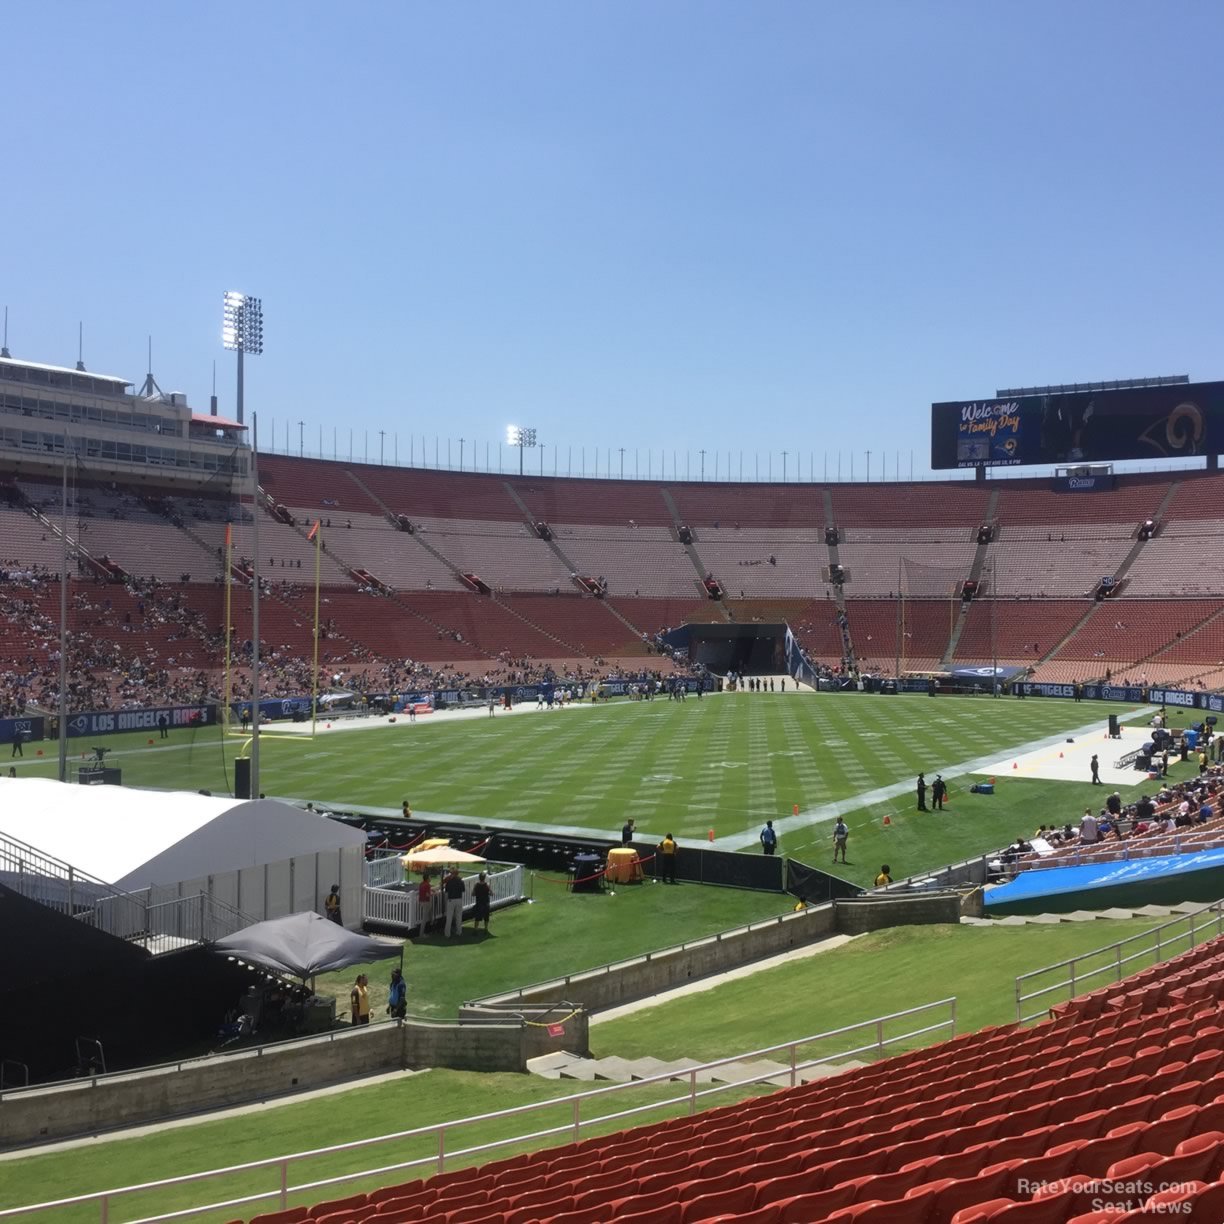 section 127, row 30 seat view  - los angeles memorial coliseum